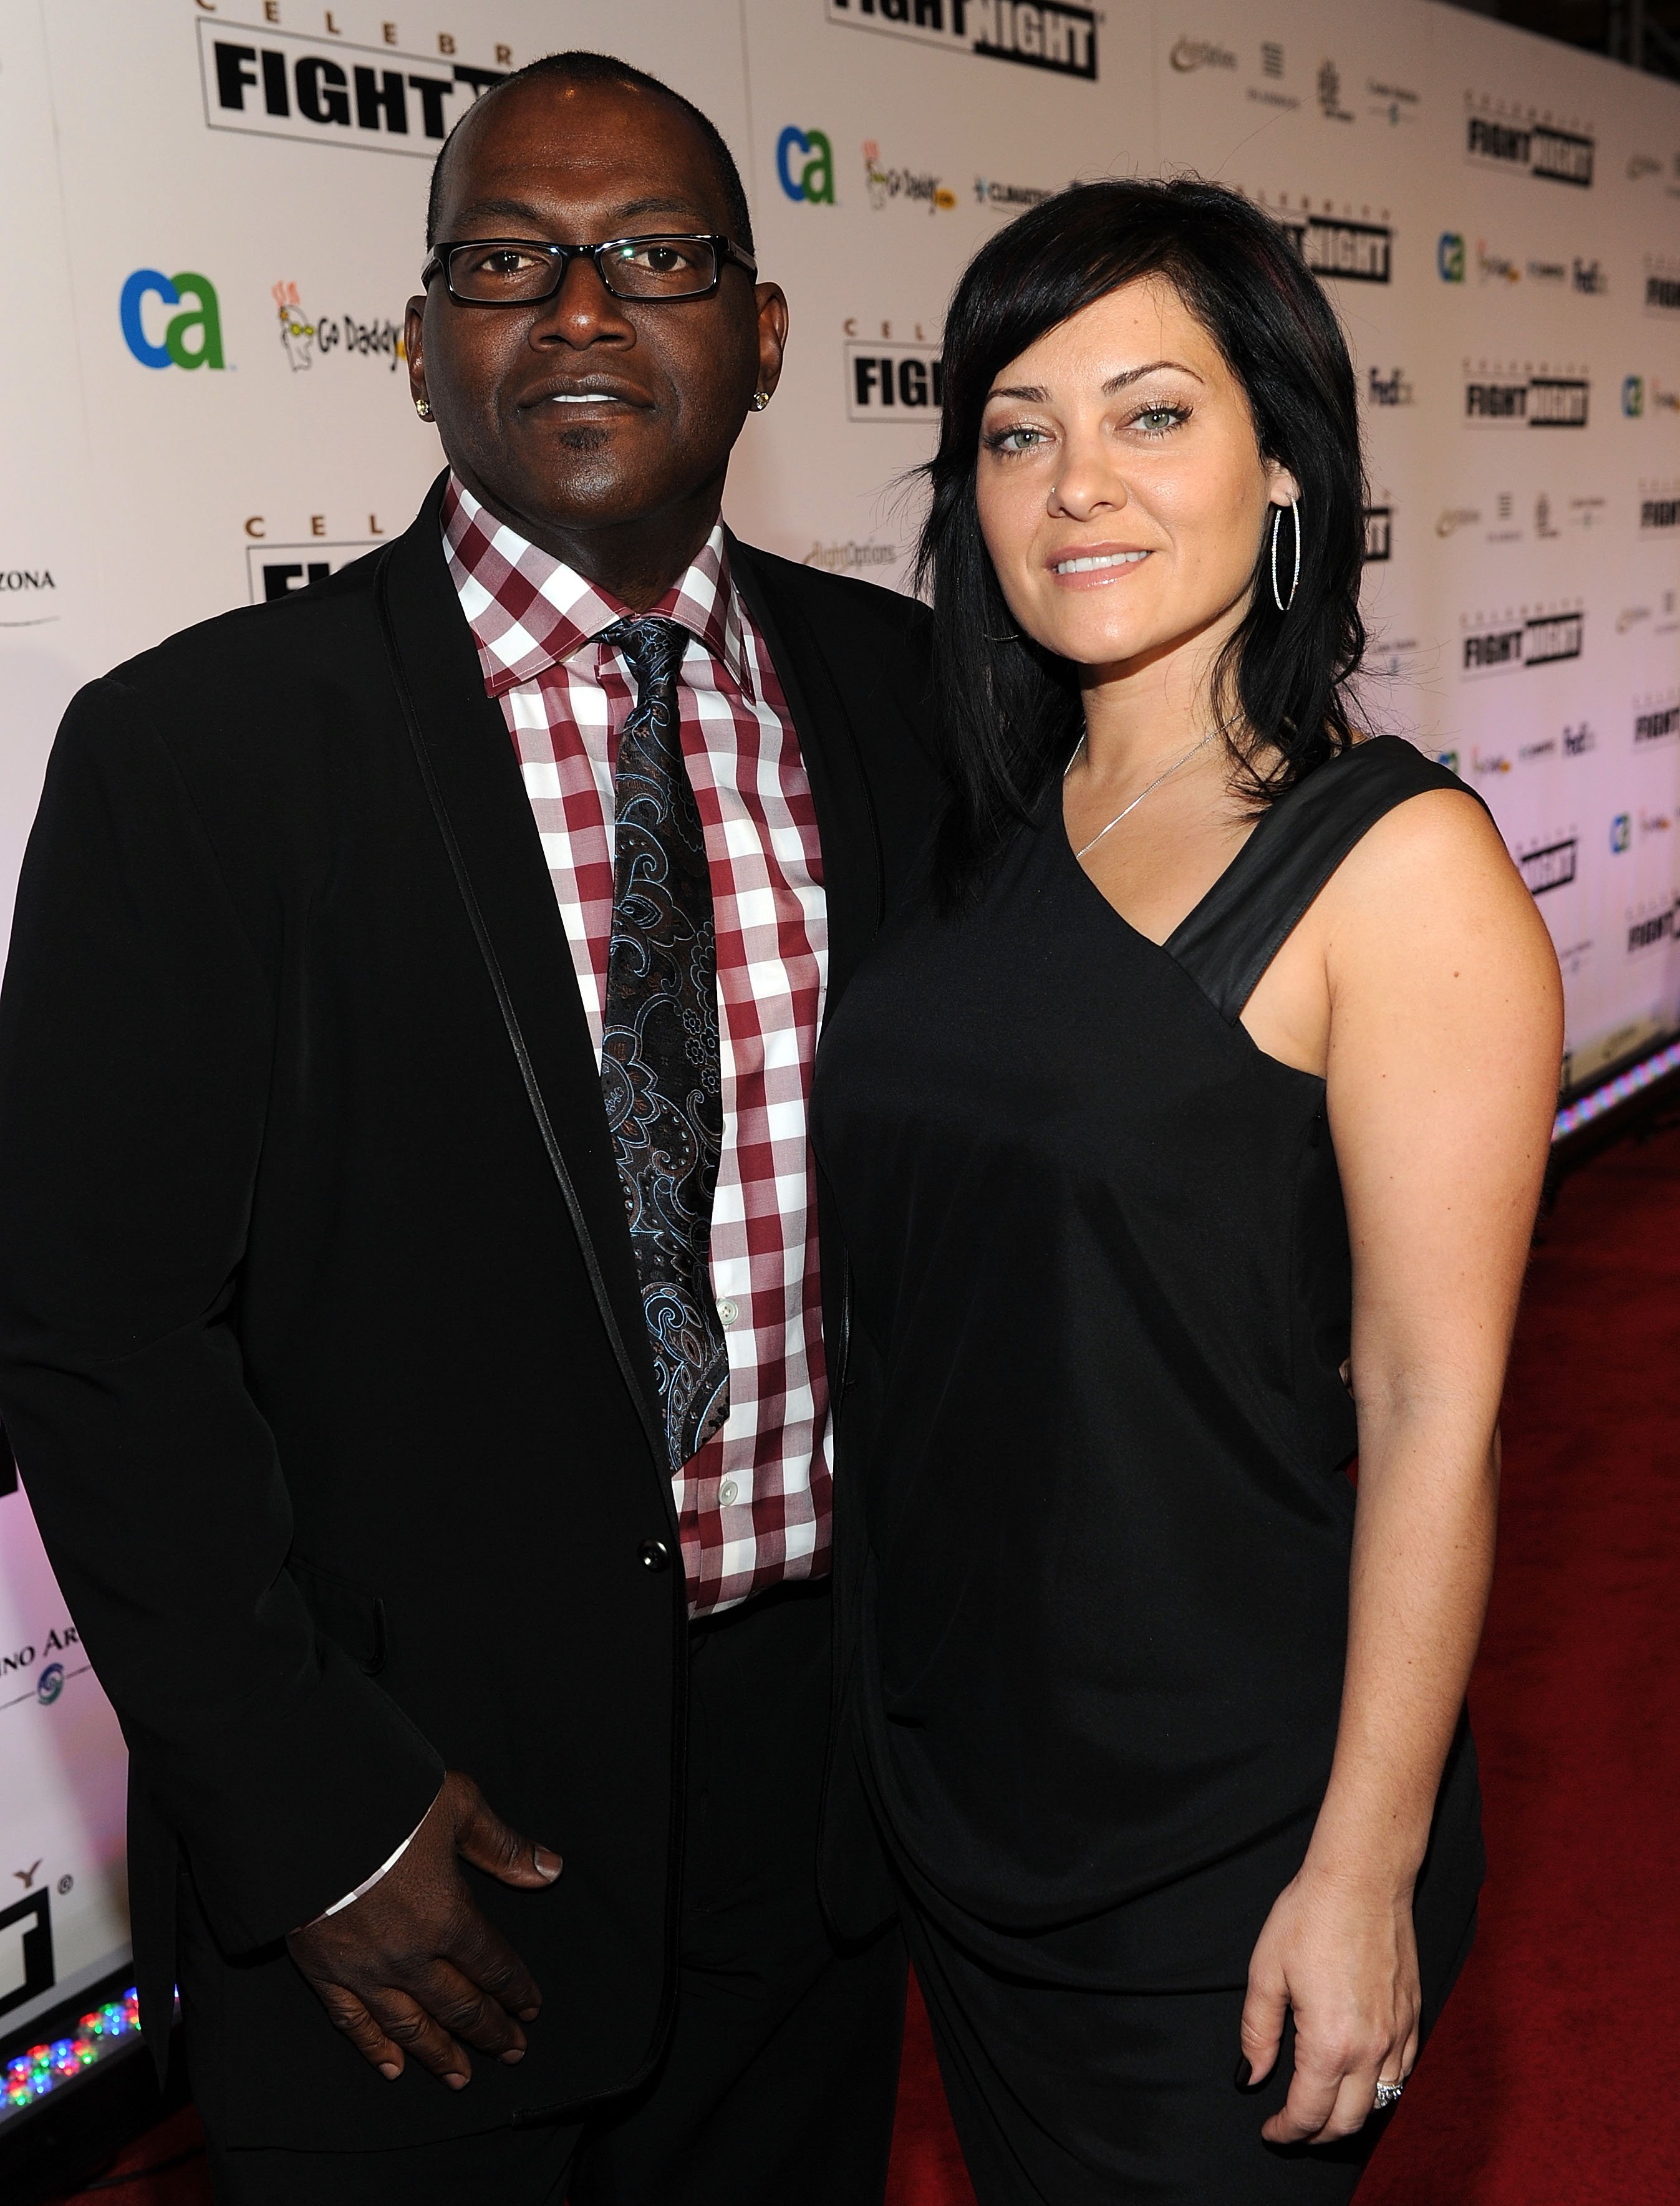 Randy Jackson and his ex-wife Erika Riker in March 2010, four years before Riker filed for divorce. | Photo: Getty Images